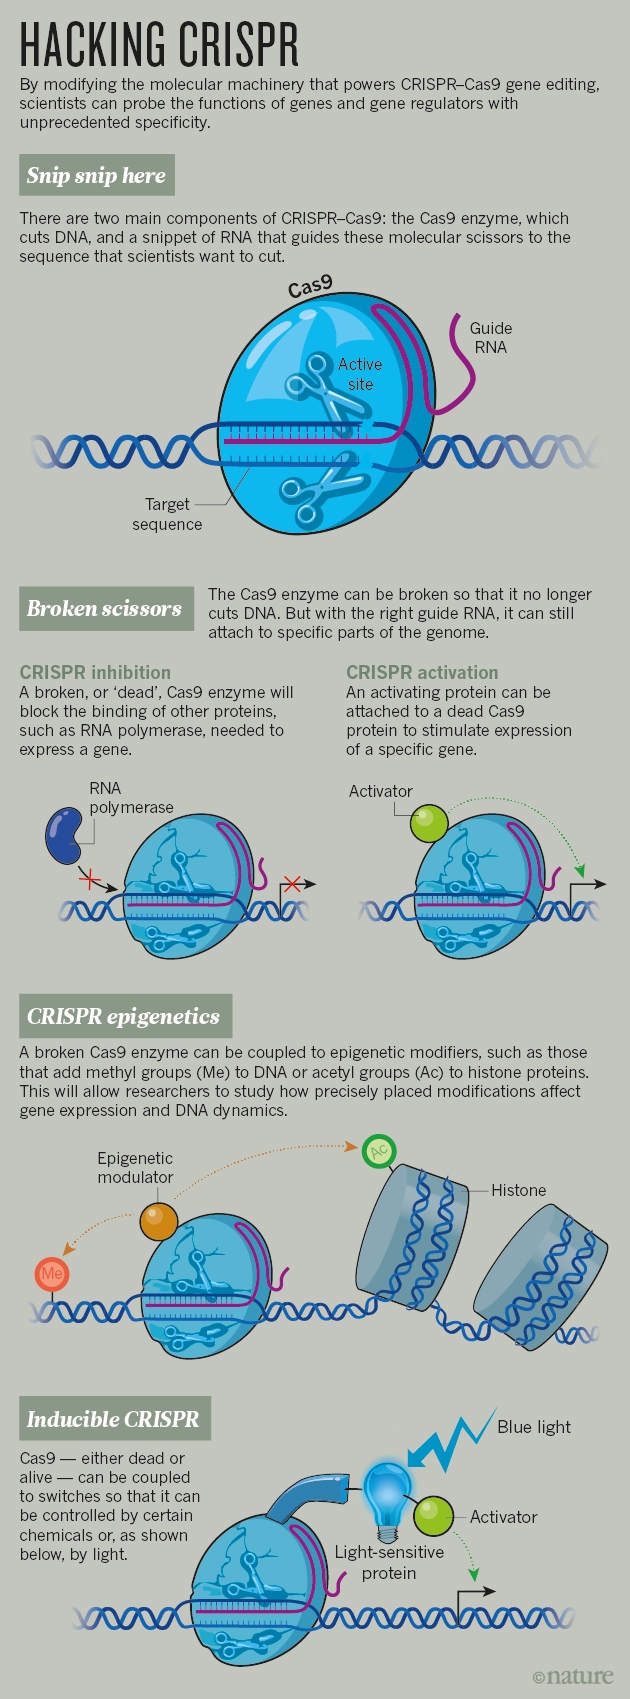 CRISPR: gene editing is just the beginning : Nature News & Comment